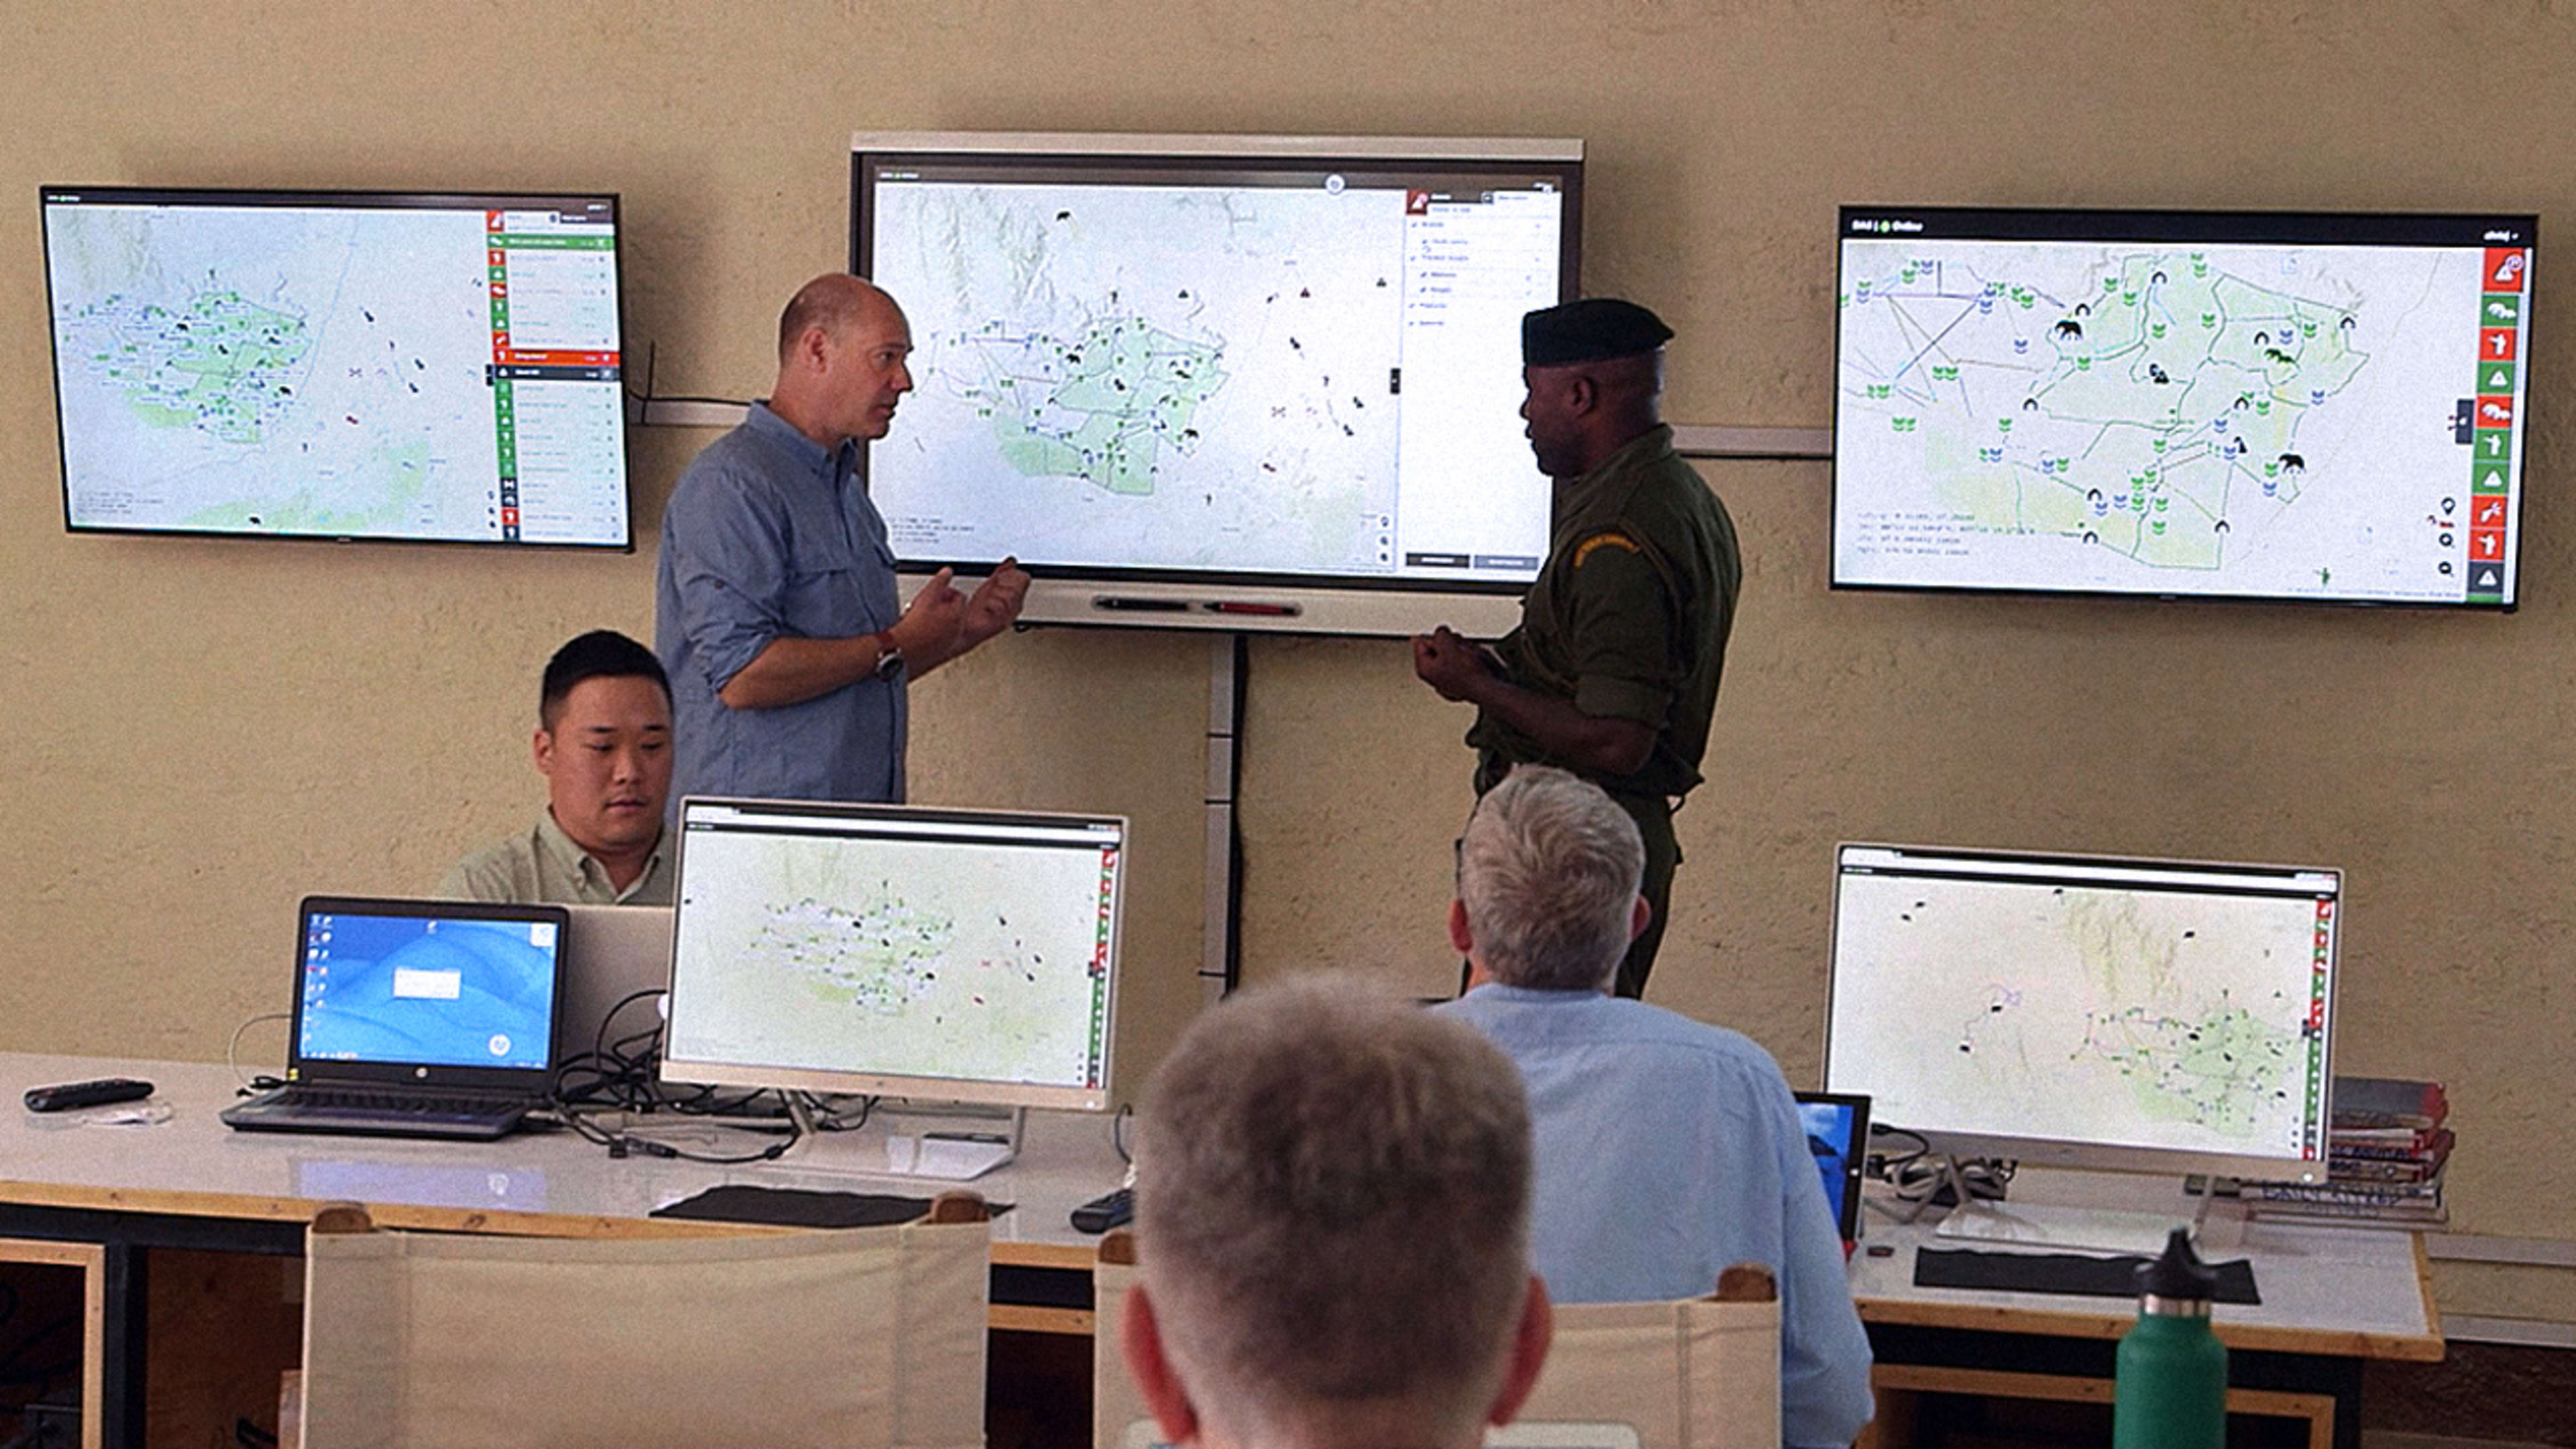 Paul Allen’s new machine learning center for impact is figuring out what poachers will do next